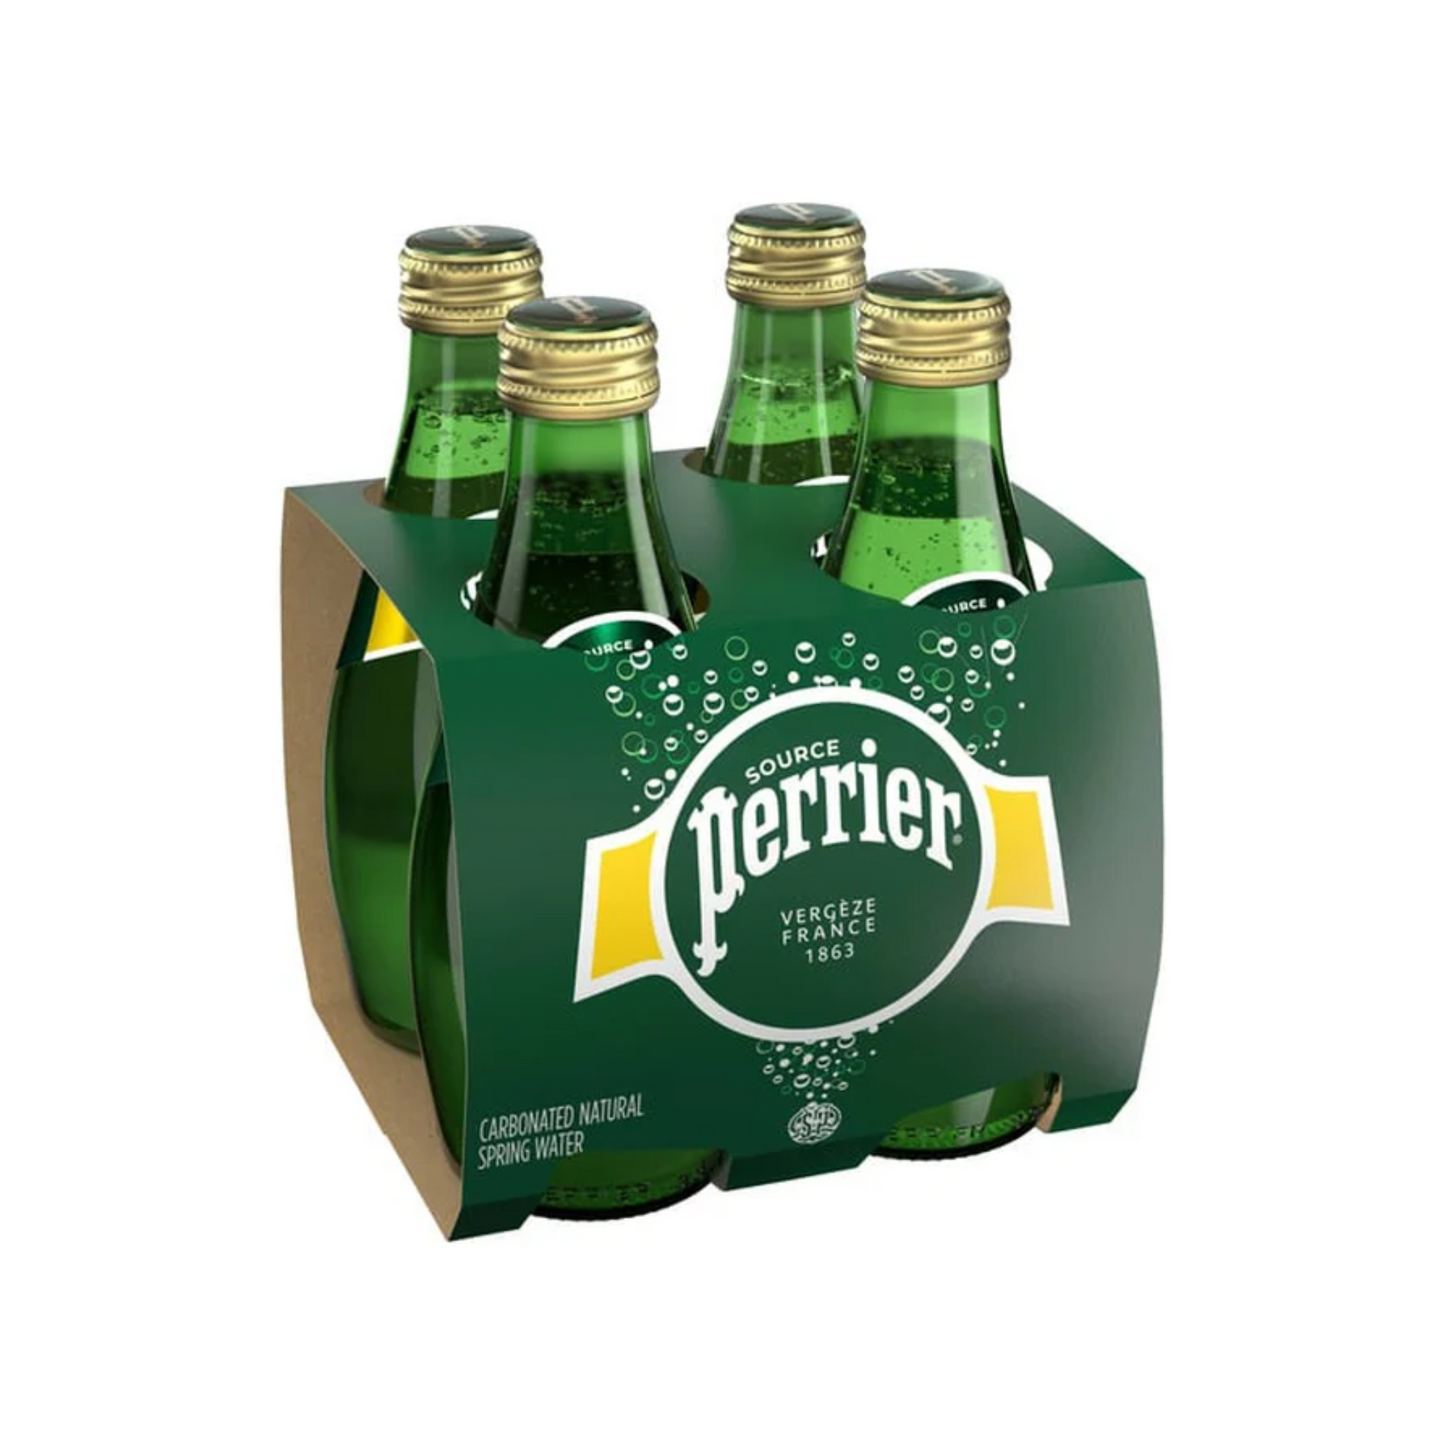 Perrier Sparkling Mineral Water 4-Pack Glass Bottles - Refreshing and Bubbly